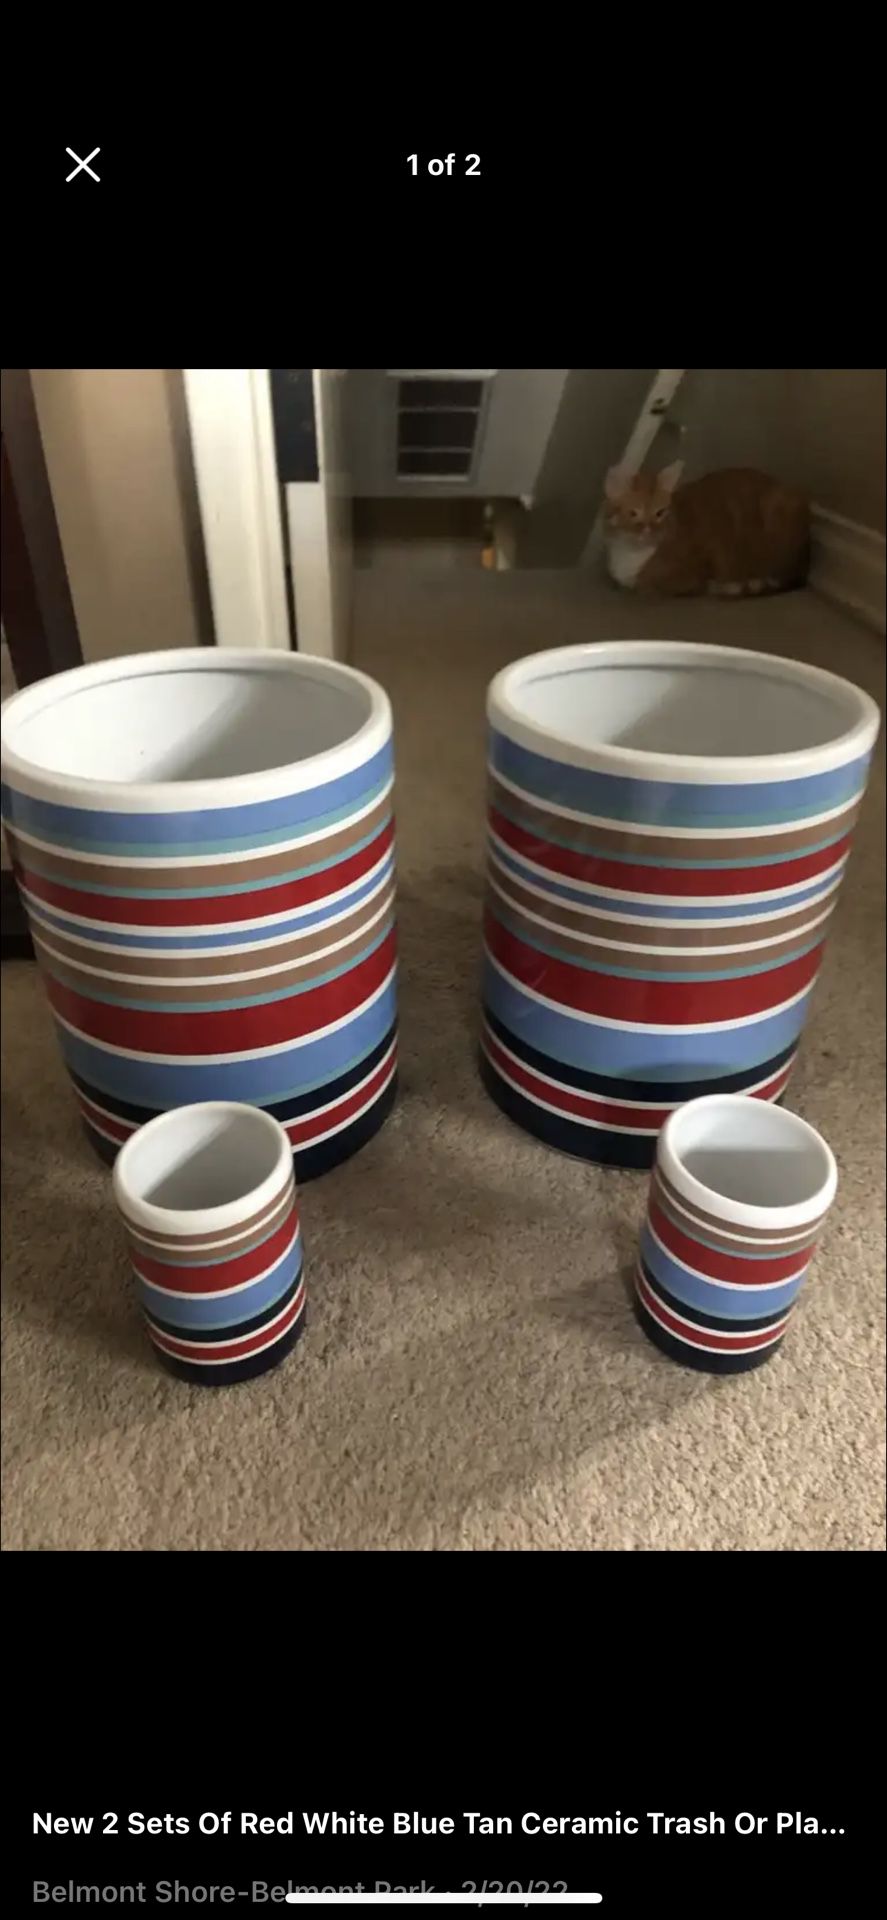 New Red White Blue Tan 2 Each Ceramic Trash Waste Cans Pots Plant Pots 